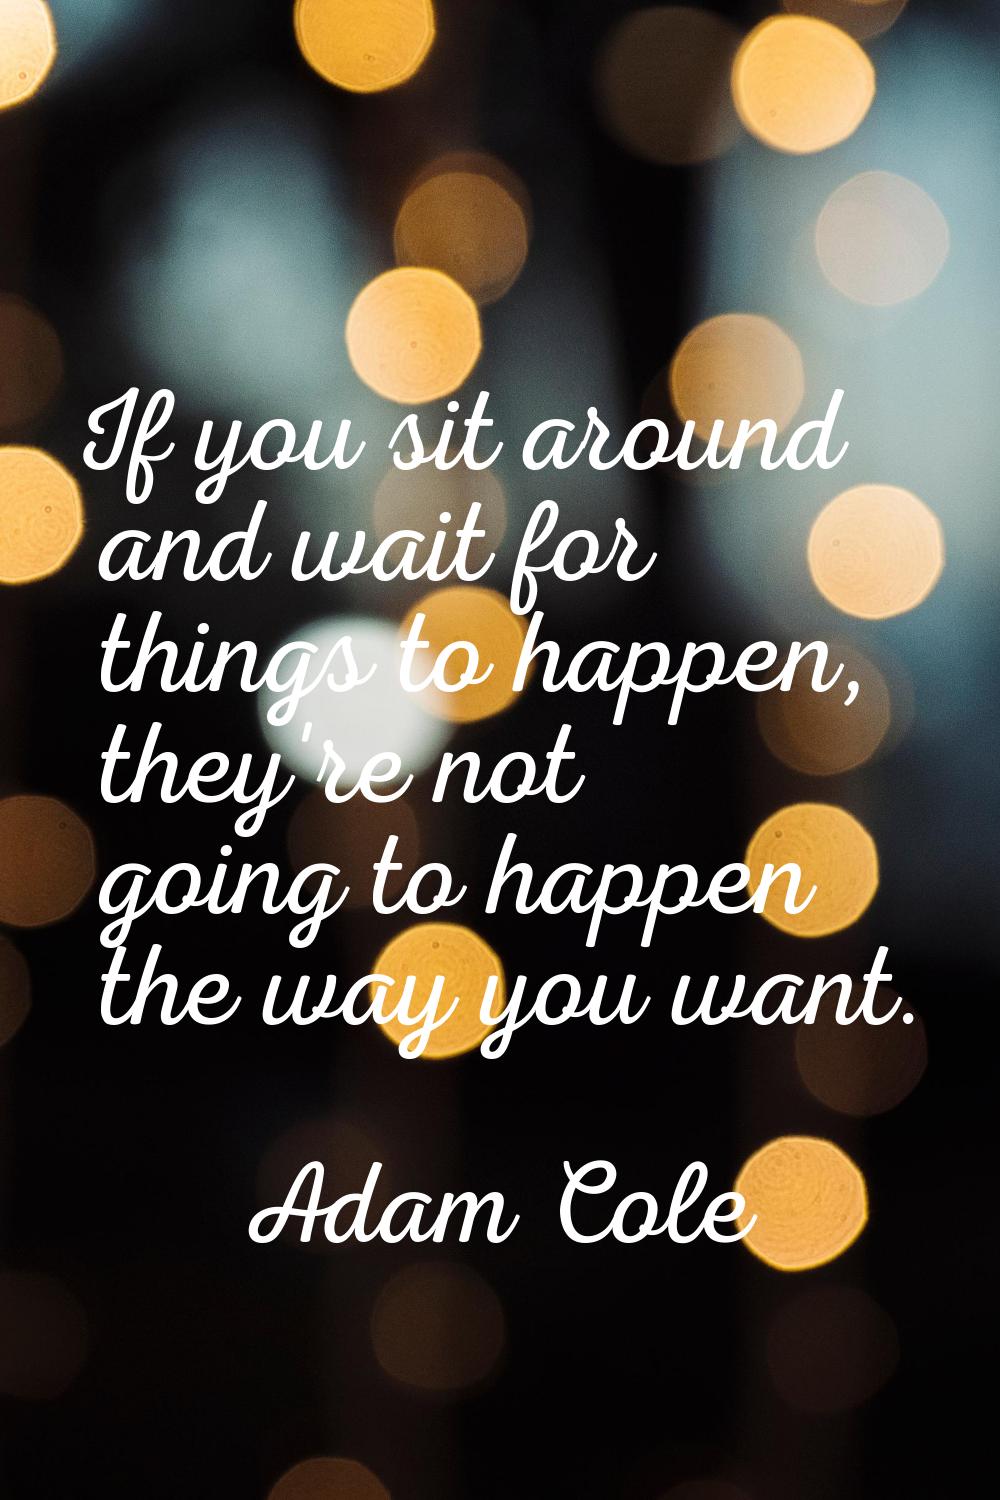 If you sit around and wait for things to happen, they're not going to happen the way you want.